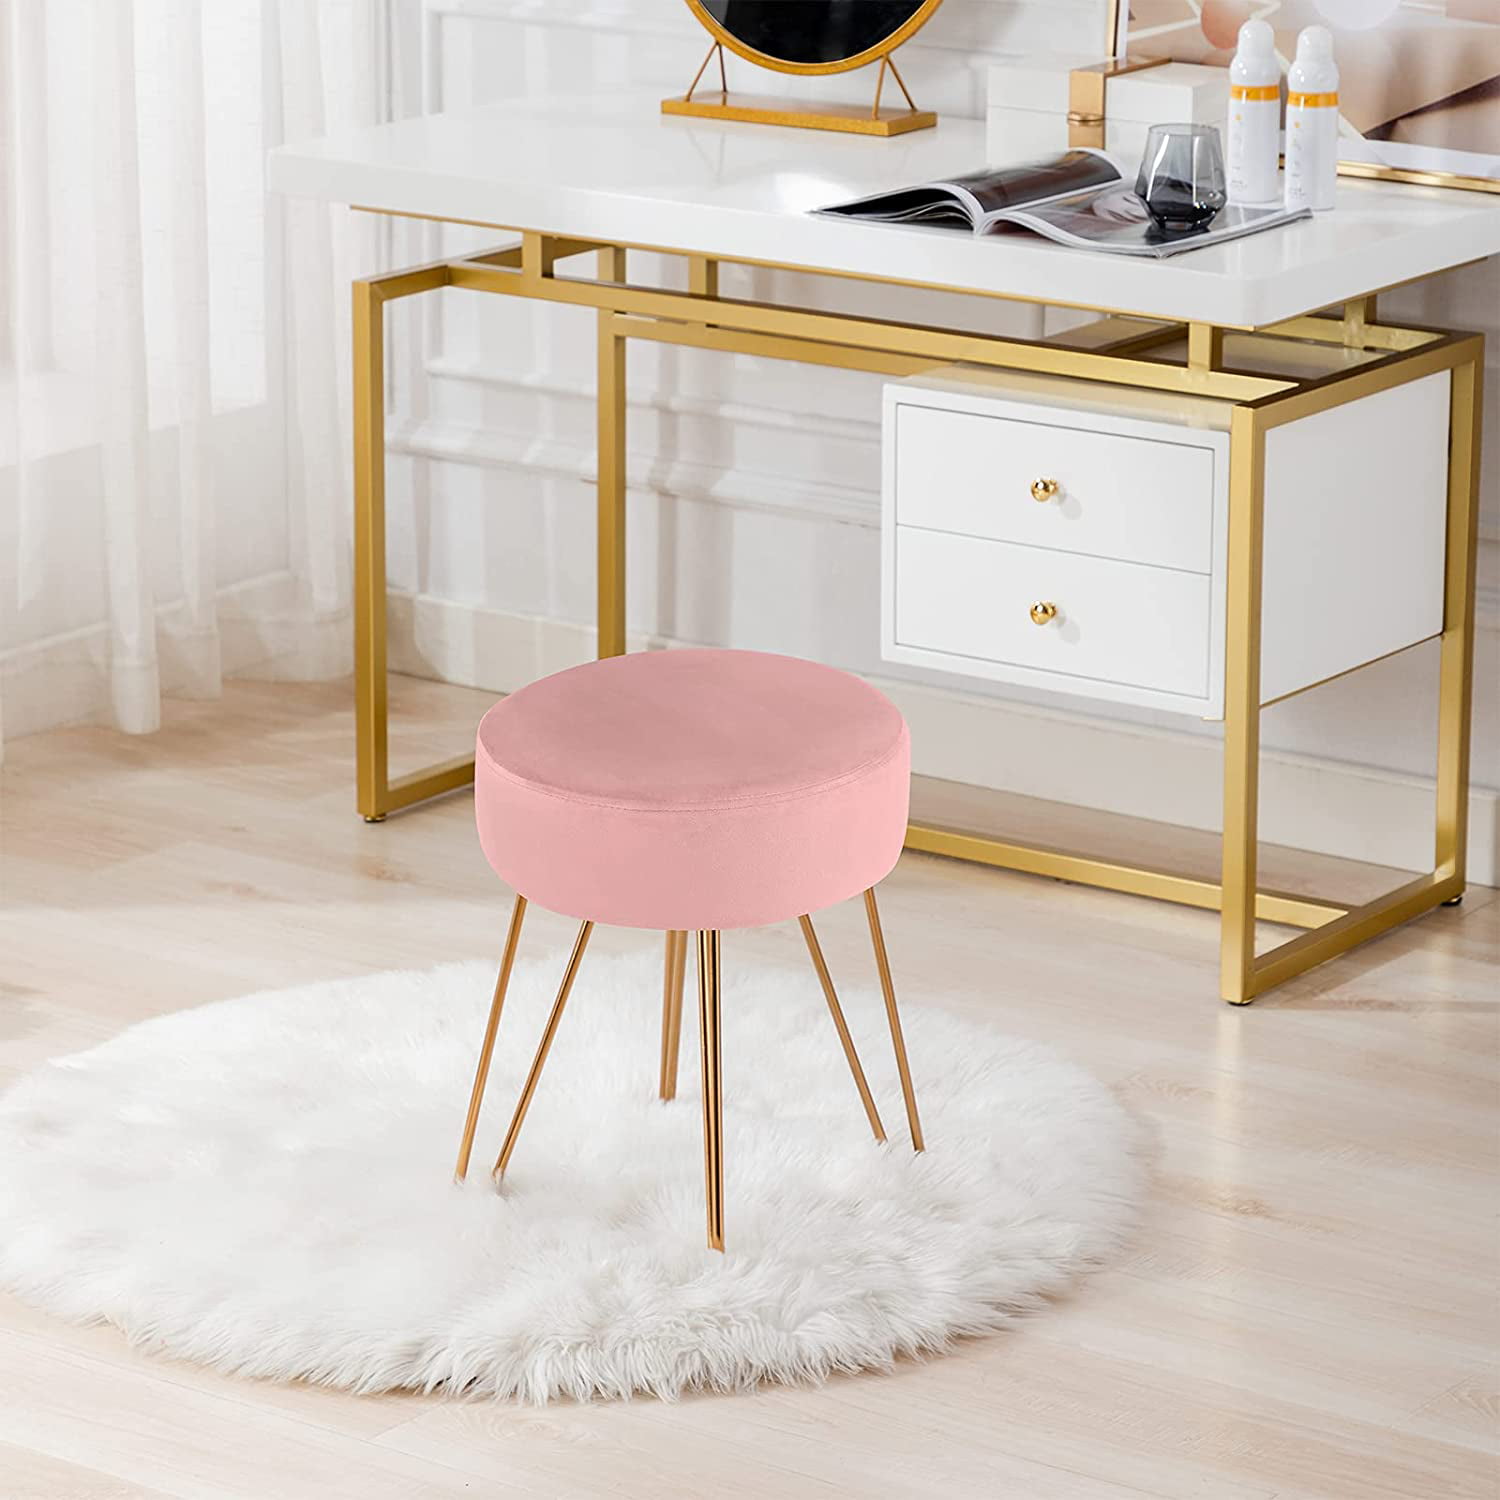 Hdxdkog Foot Stool, Modern S-Shape Teddy Fabric Ottoman Makeup Chair  Footstool Under Desk, Upholstered Extra Seating for Living Room, Bedroom